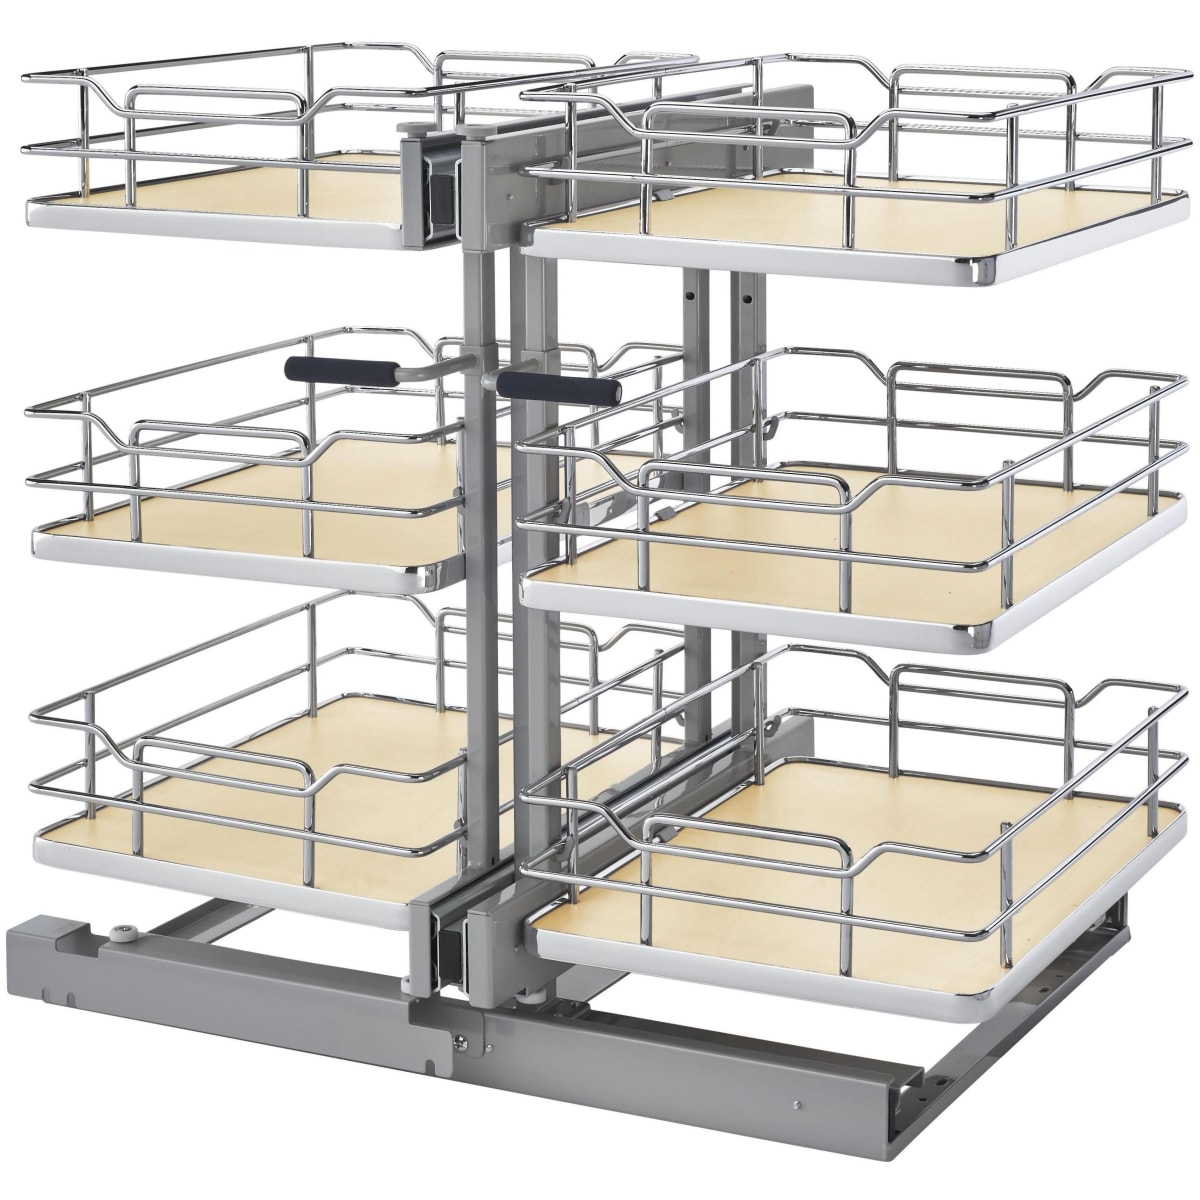 Rev-A-Shelf 5-in W x 5-in H 1-Tier Pull Out Metal Lift Shelf at